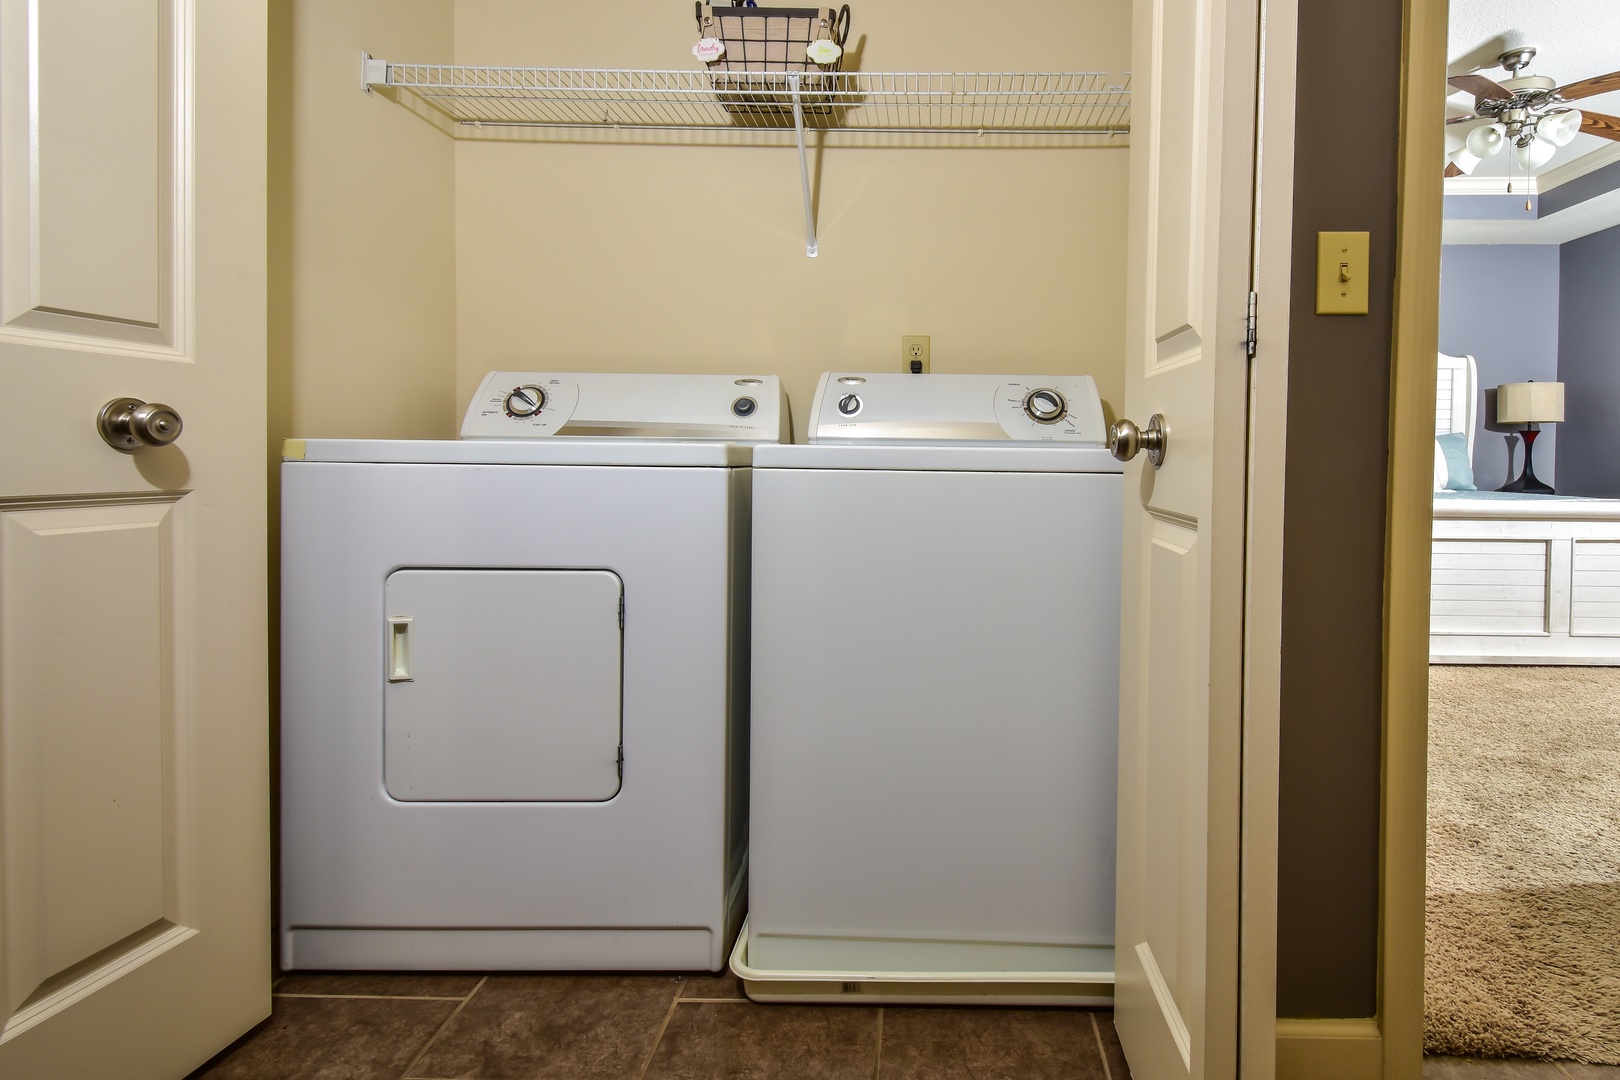 Private laundry is available for your stay, tucked away near the bedrooms